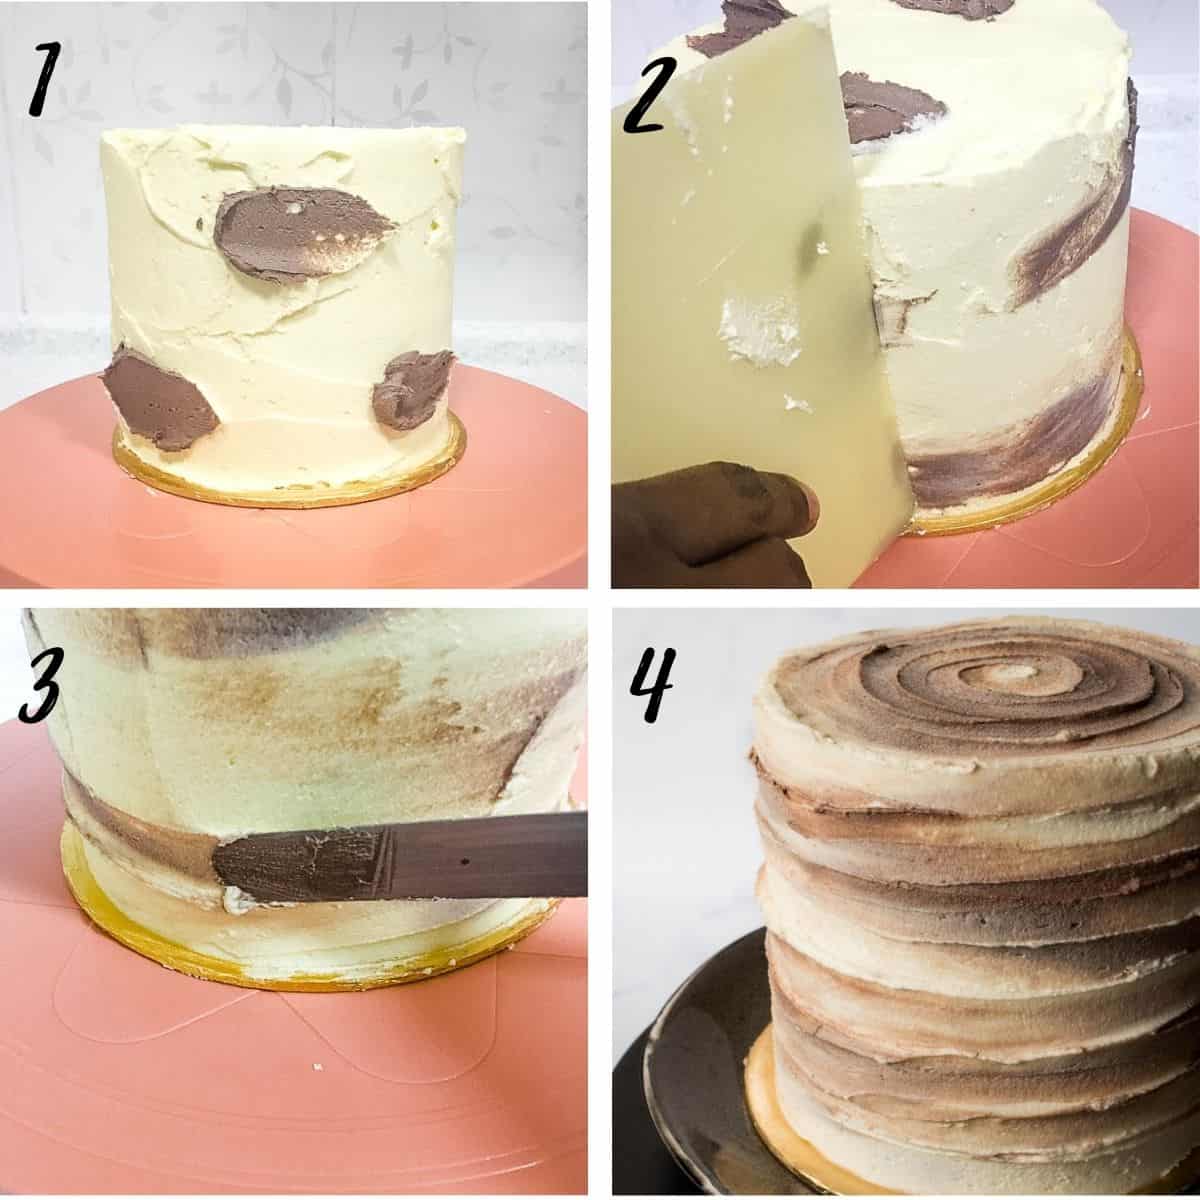 A poster to 4 images showing how to frosting a cake.